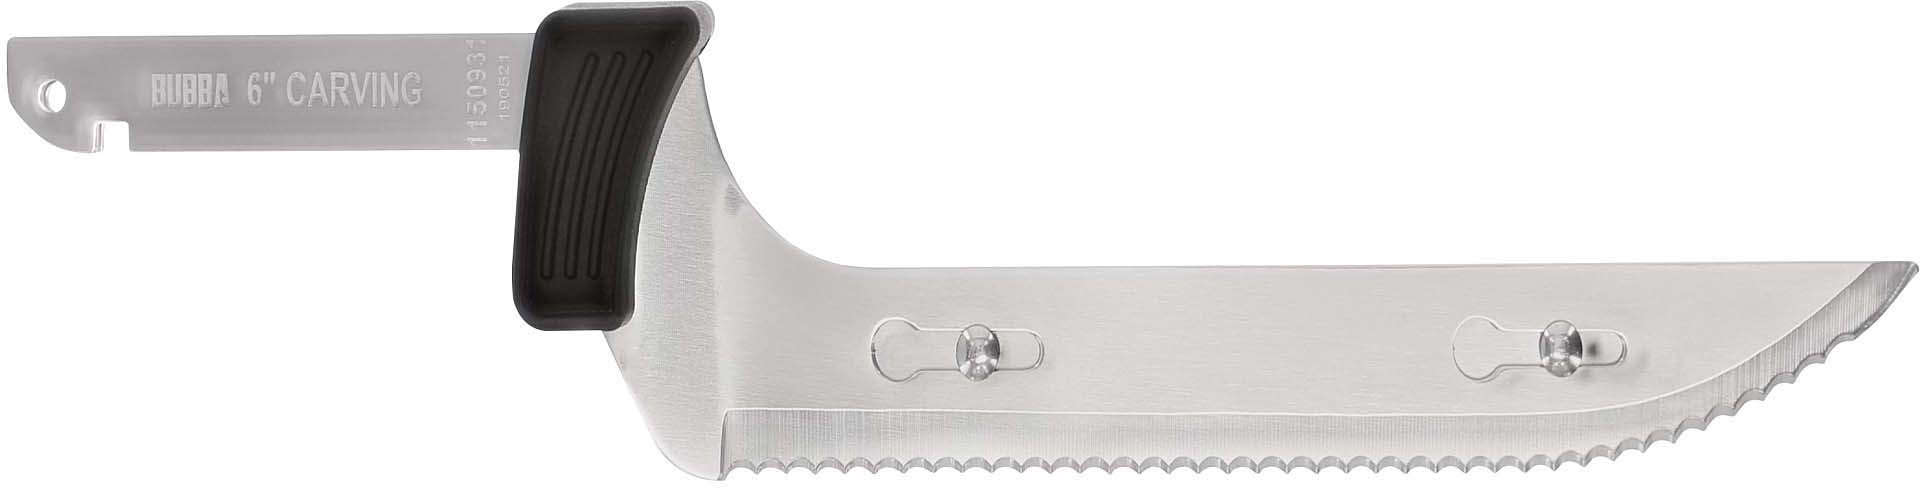 Kitchen Series Electric Knife | BUBBA